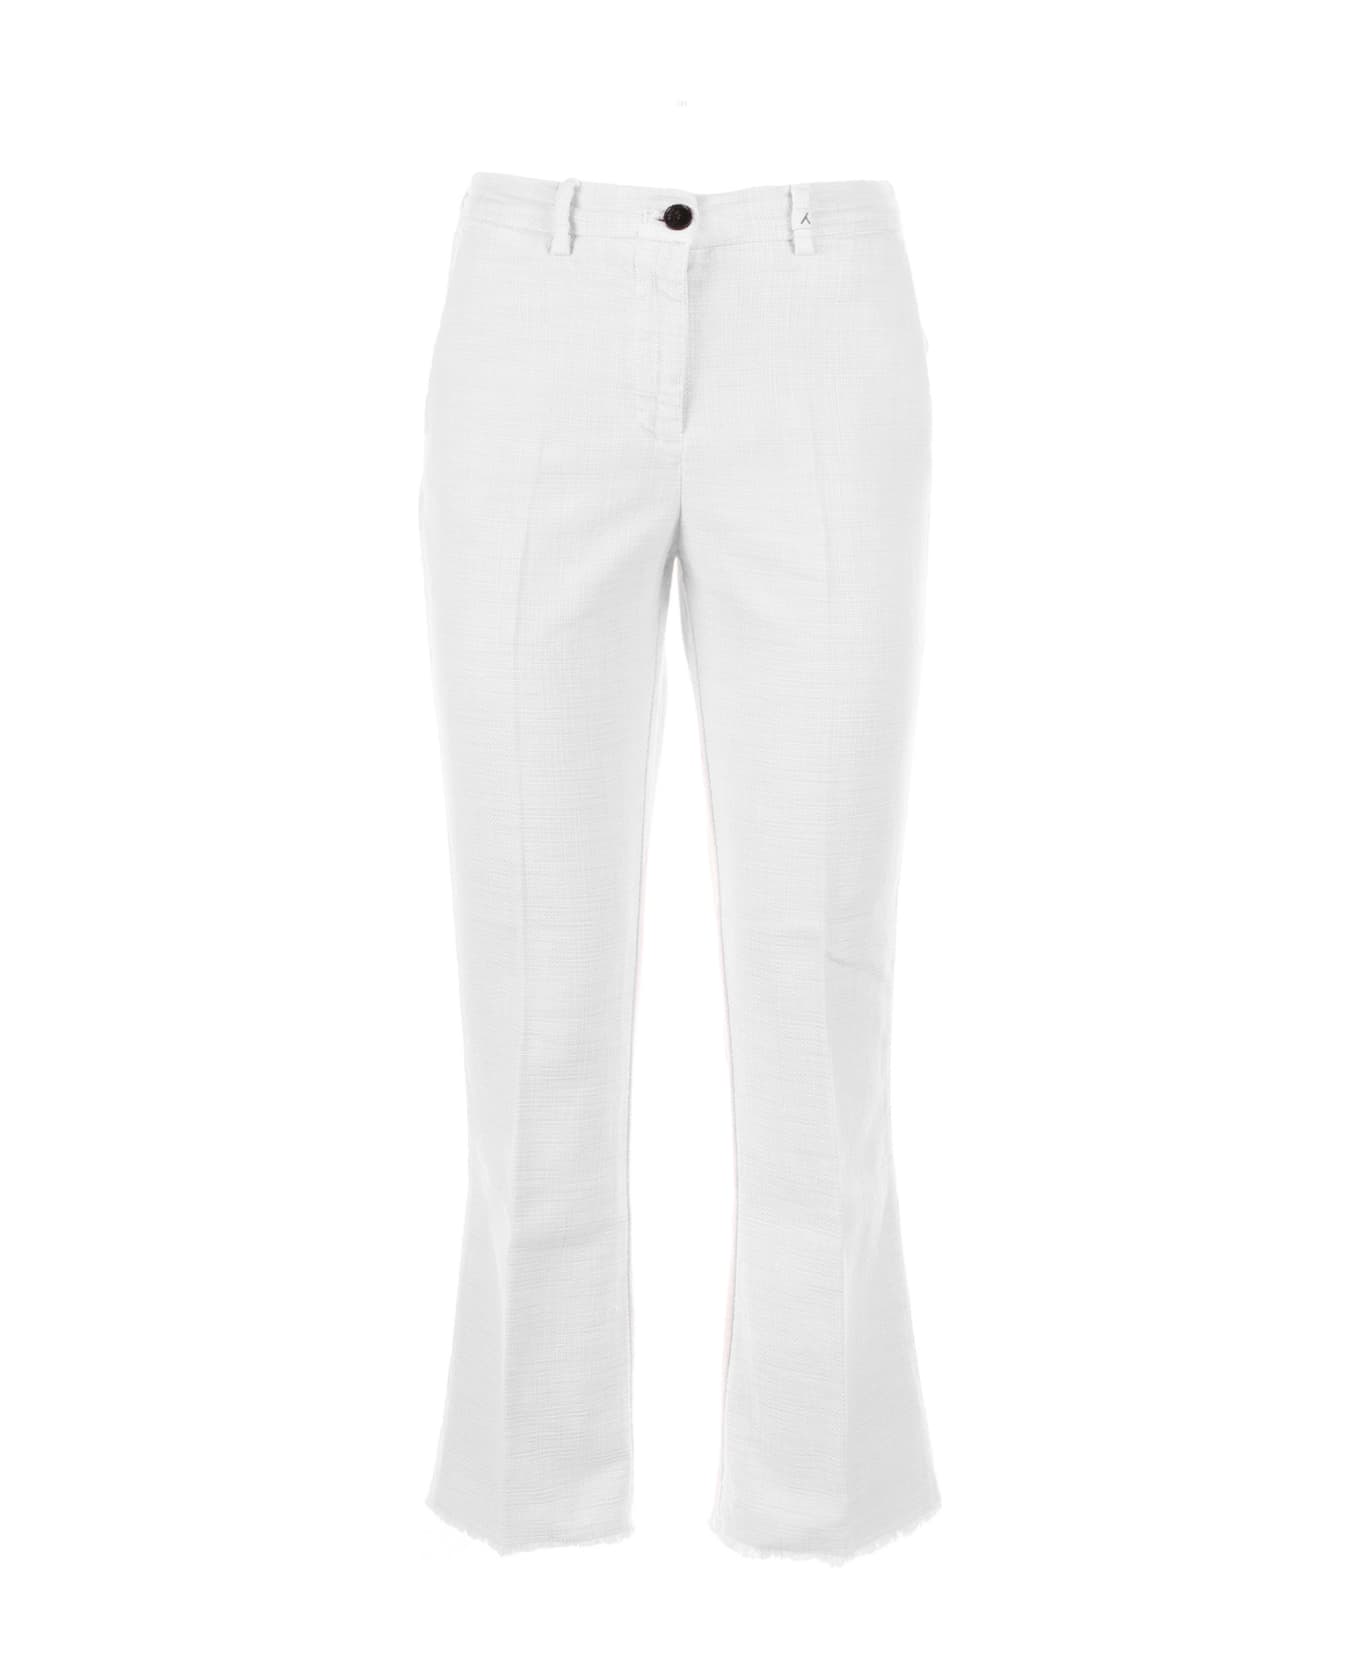 Myths Women's White Trousers - OFF WHITE